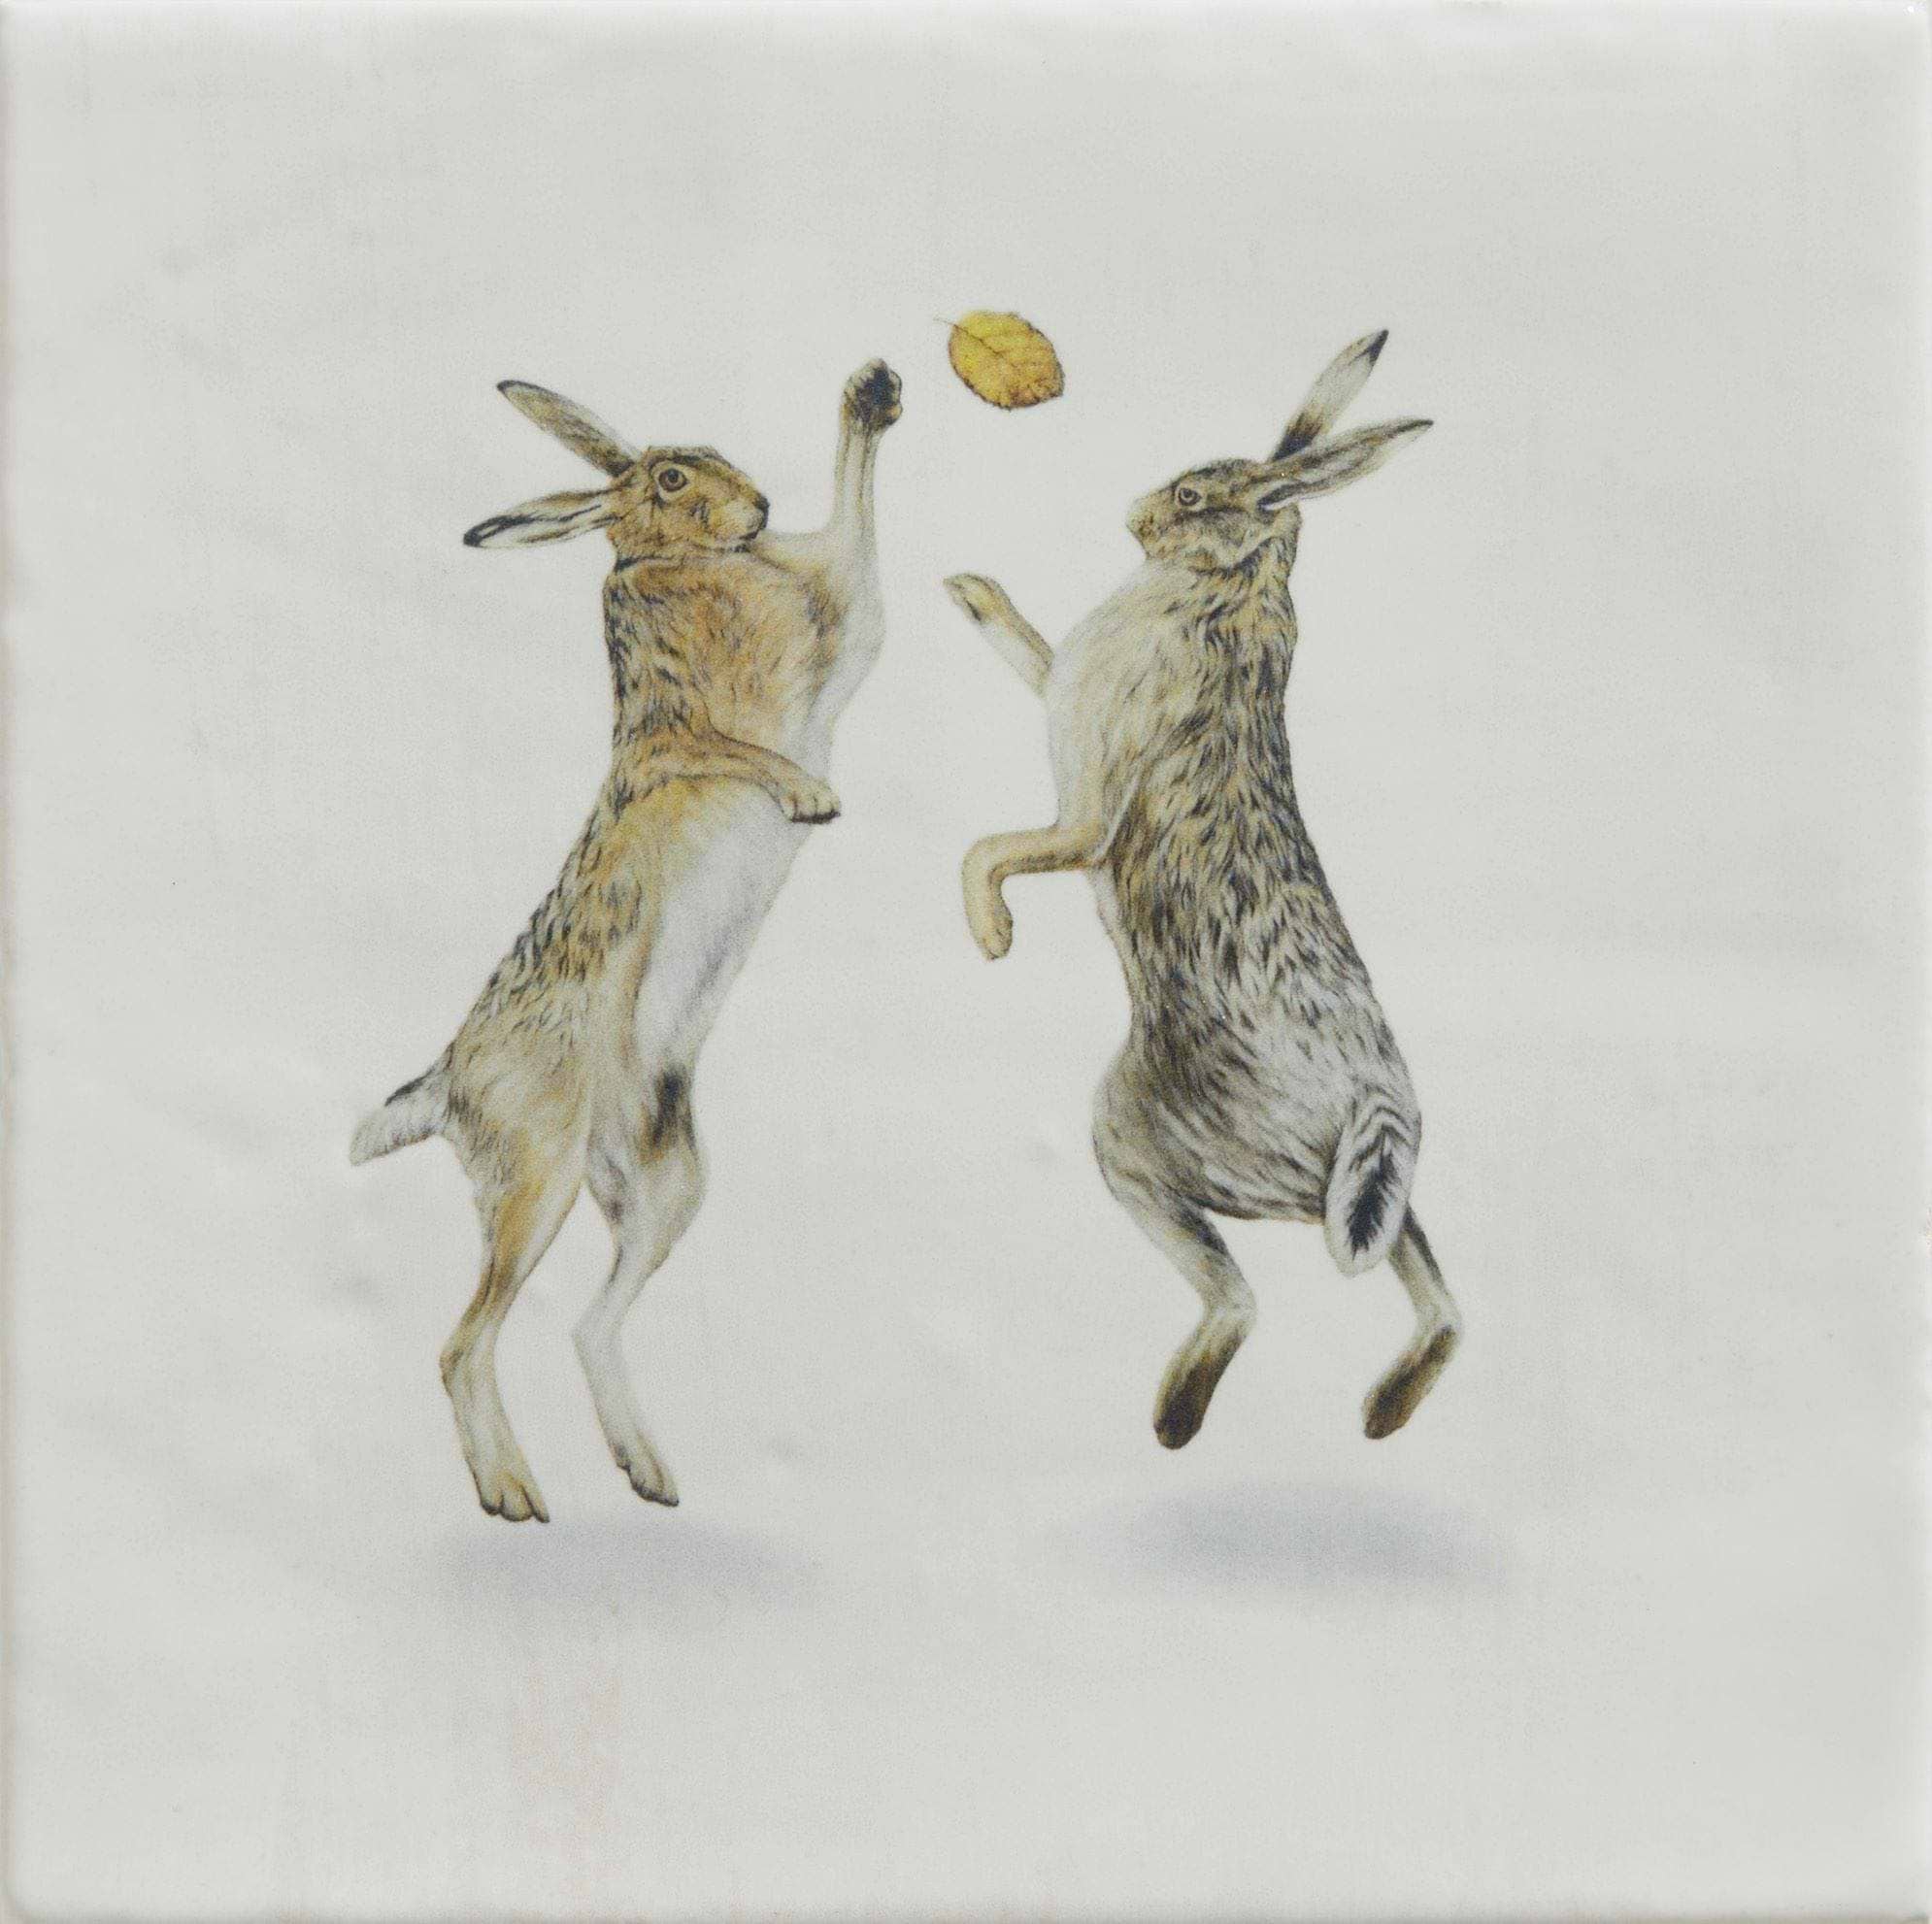 Ca’ Pietra Tiles - Ceramic Autumn Dance 12.5 x 12.5cm Wiltshire Hares By Joanna May